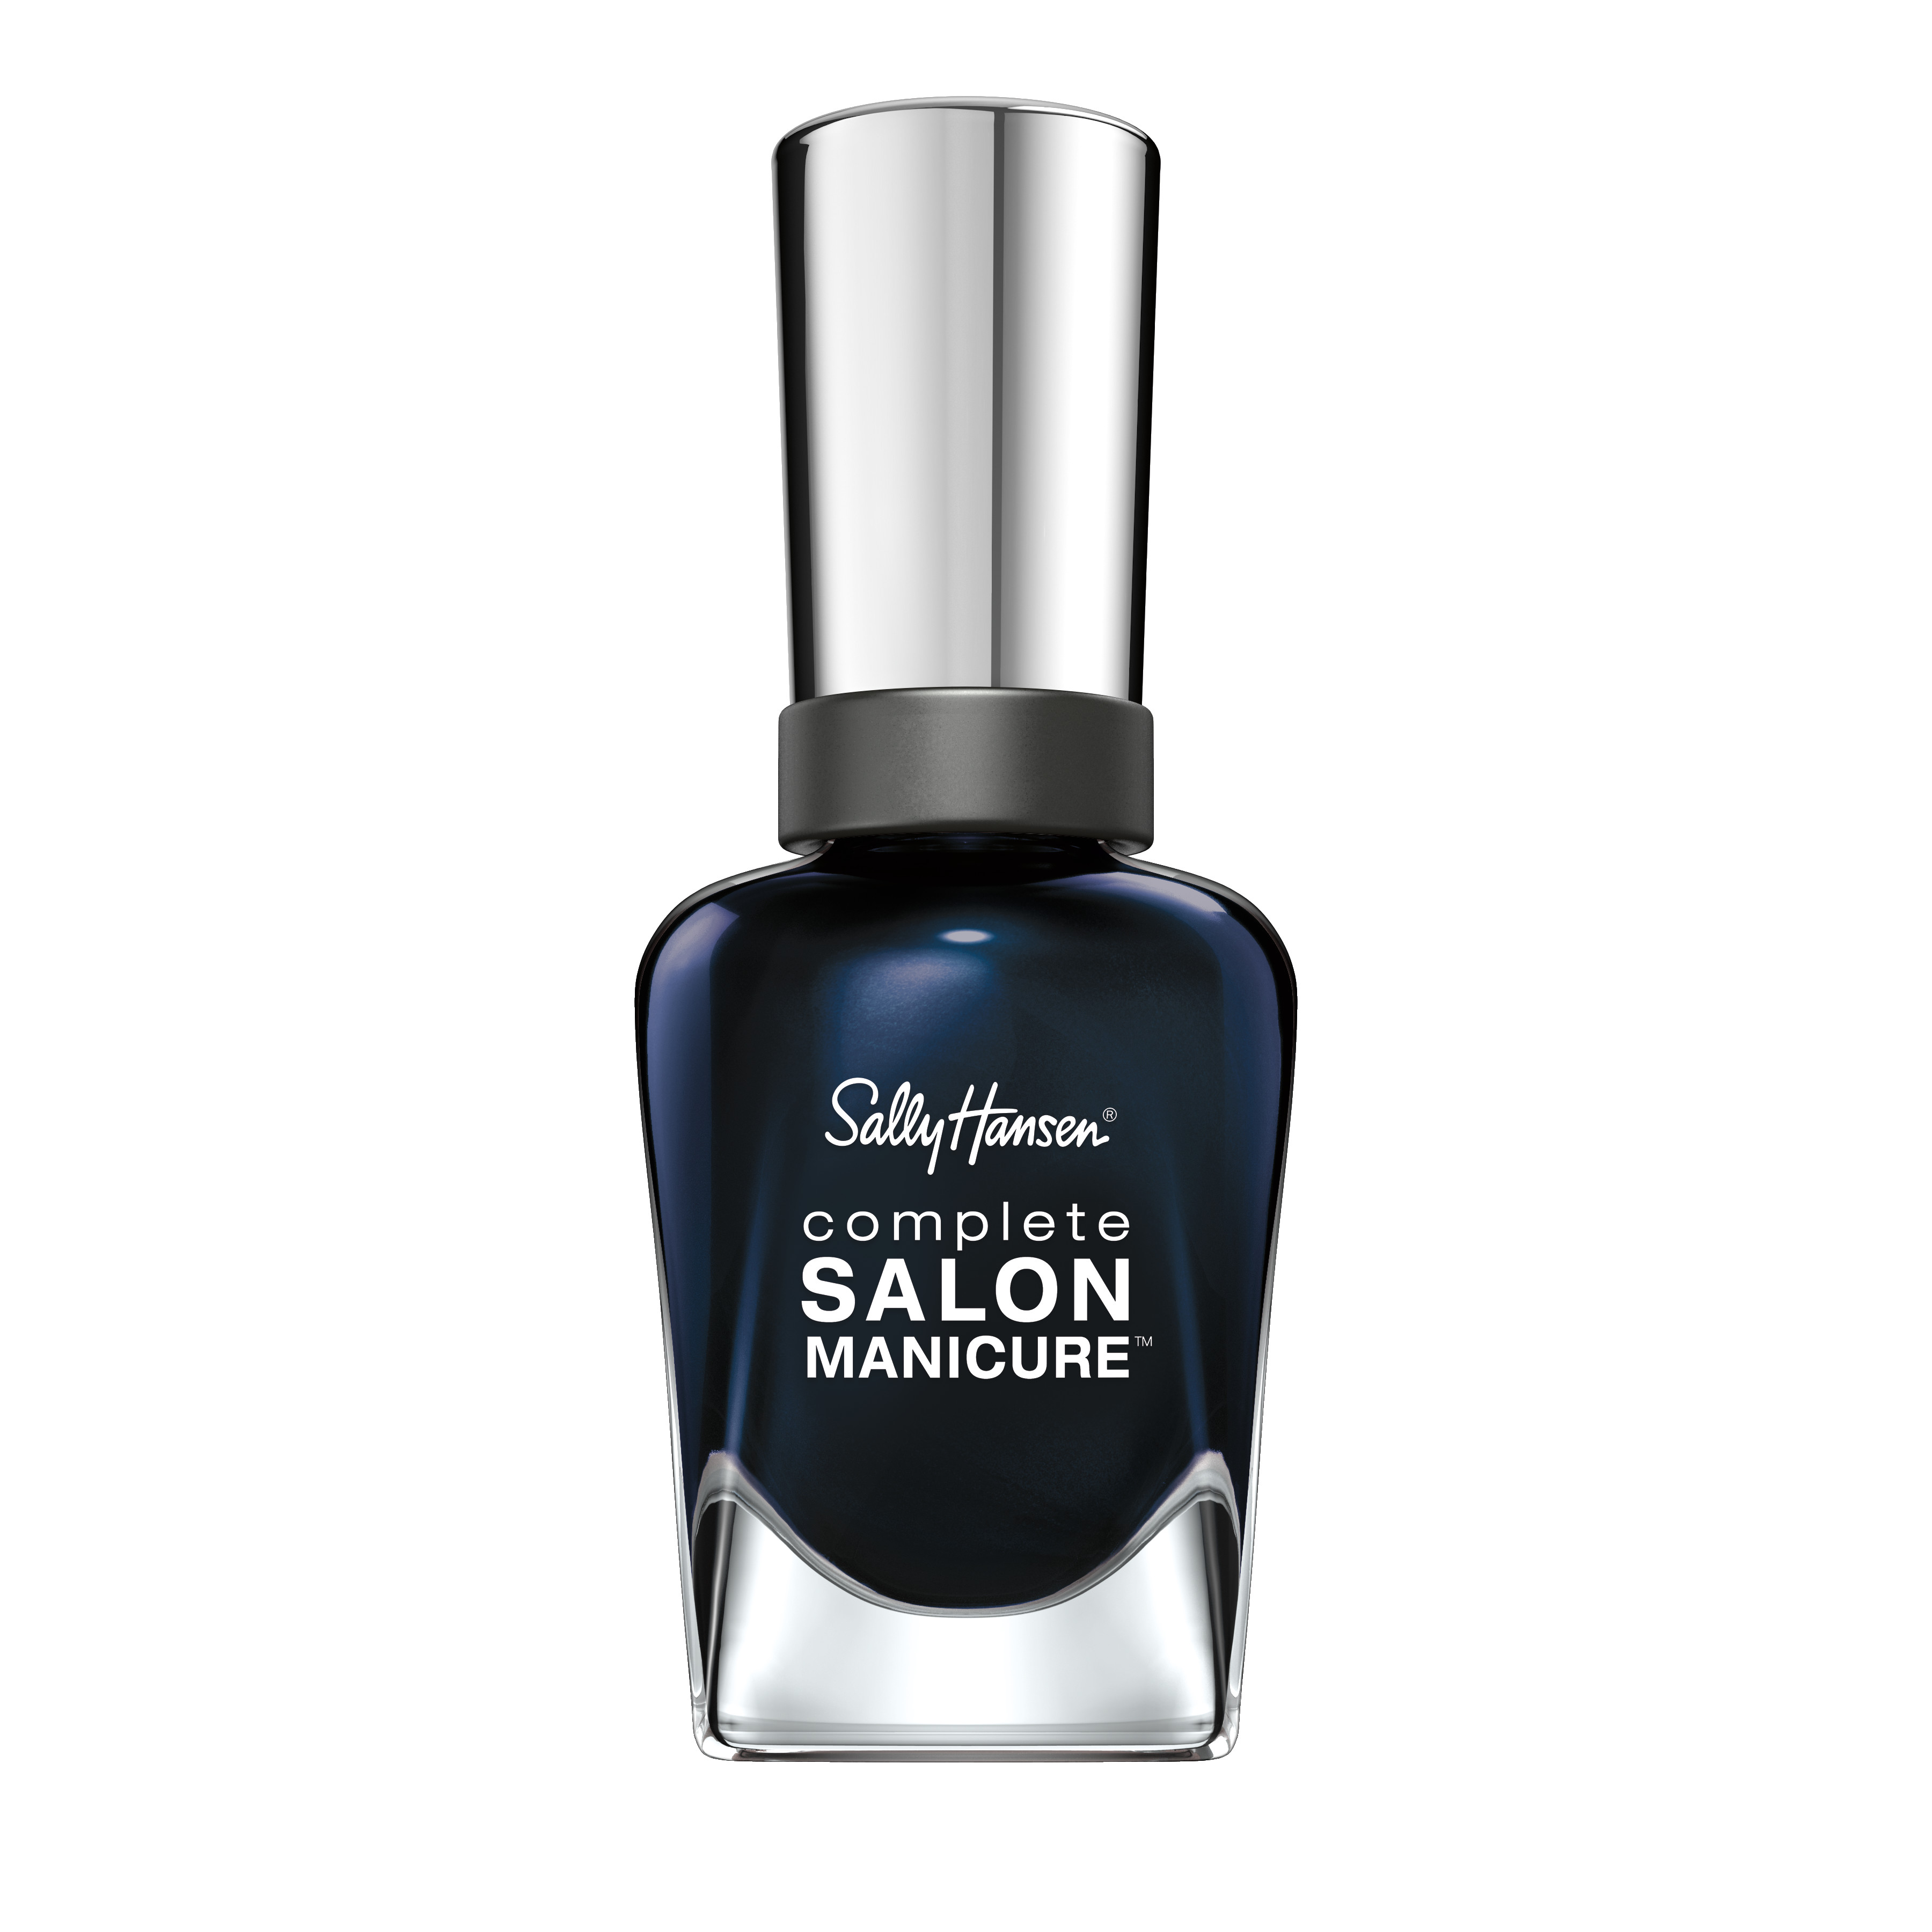 Sally Hansen Complete Salon Manicure Nail Color, To The Moon And Back - image 1 of 2